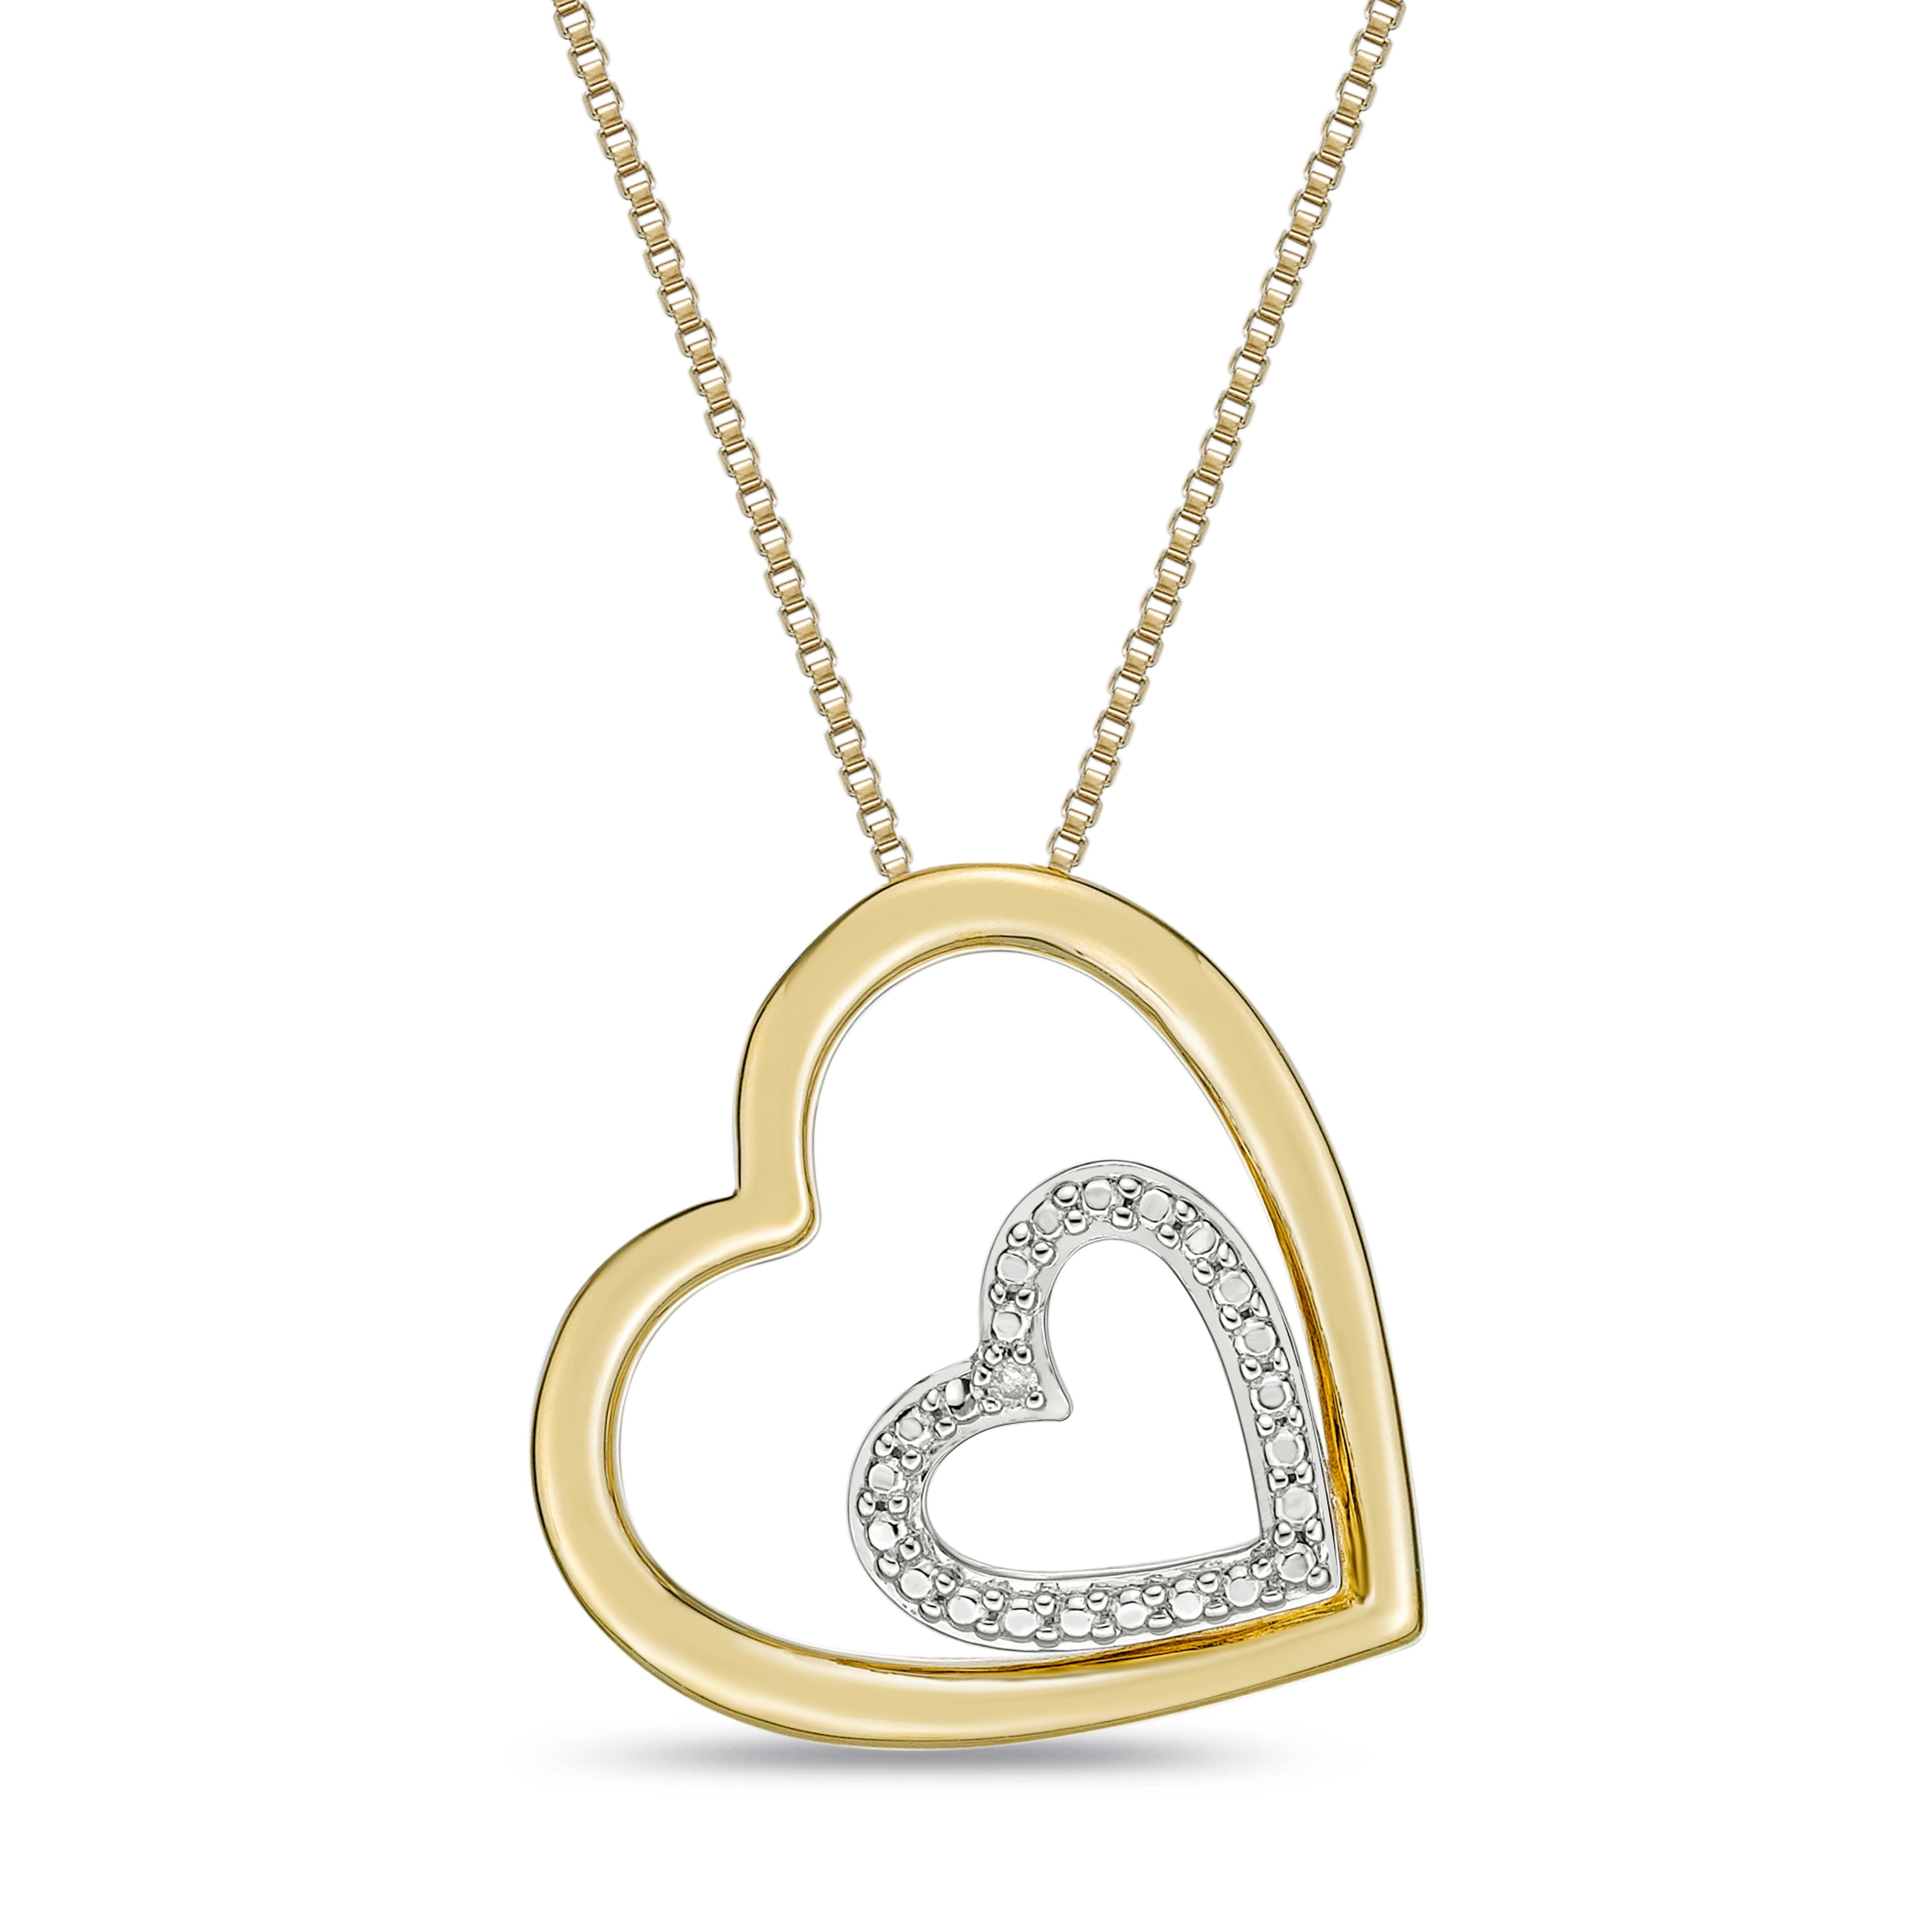 Brilliance Fine Jewelry .925 Sterling Silver and Yellow Gold Double Diamond Heart Pendant Necklace with 18" Chain